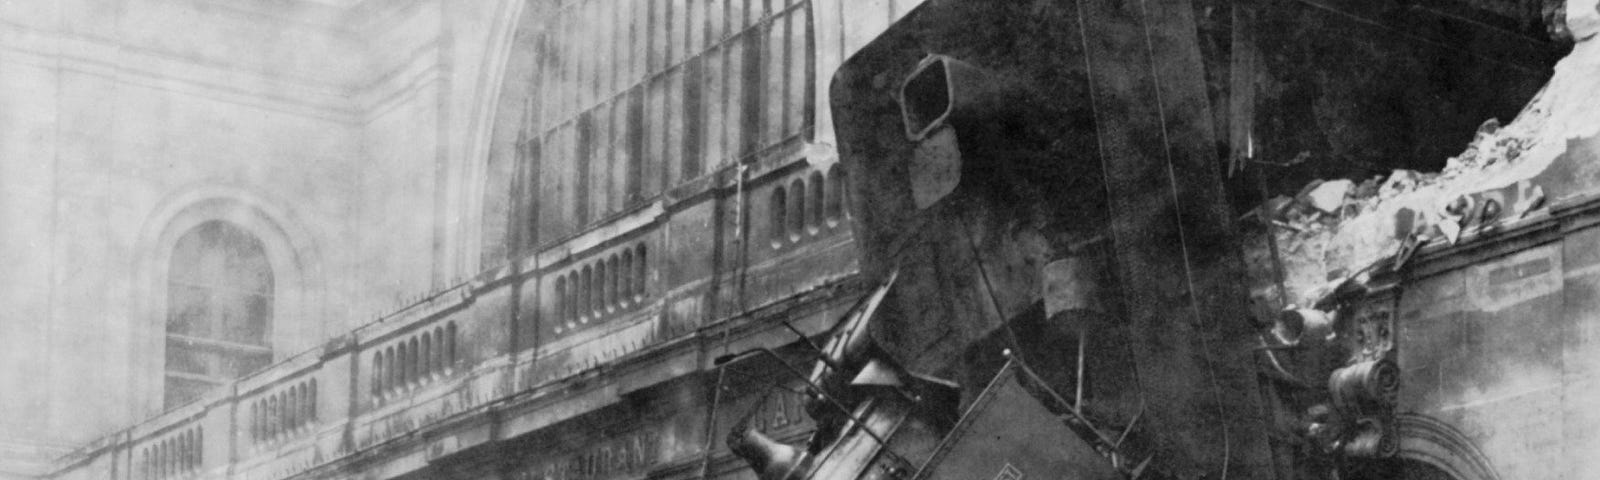 Train wreck at Montparnasse station: train extends through wrecked upper floor wall, awkwardly angled downward towards the street exactly as a train shouldn’t